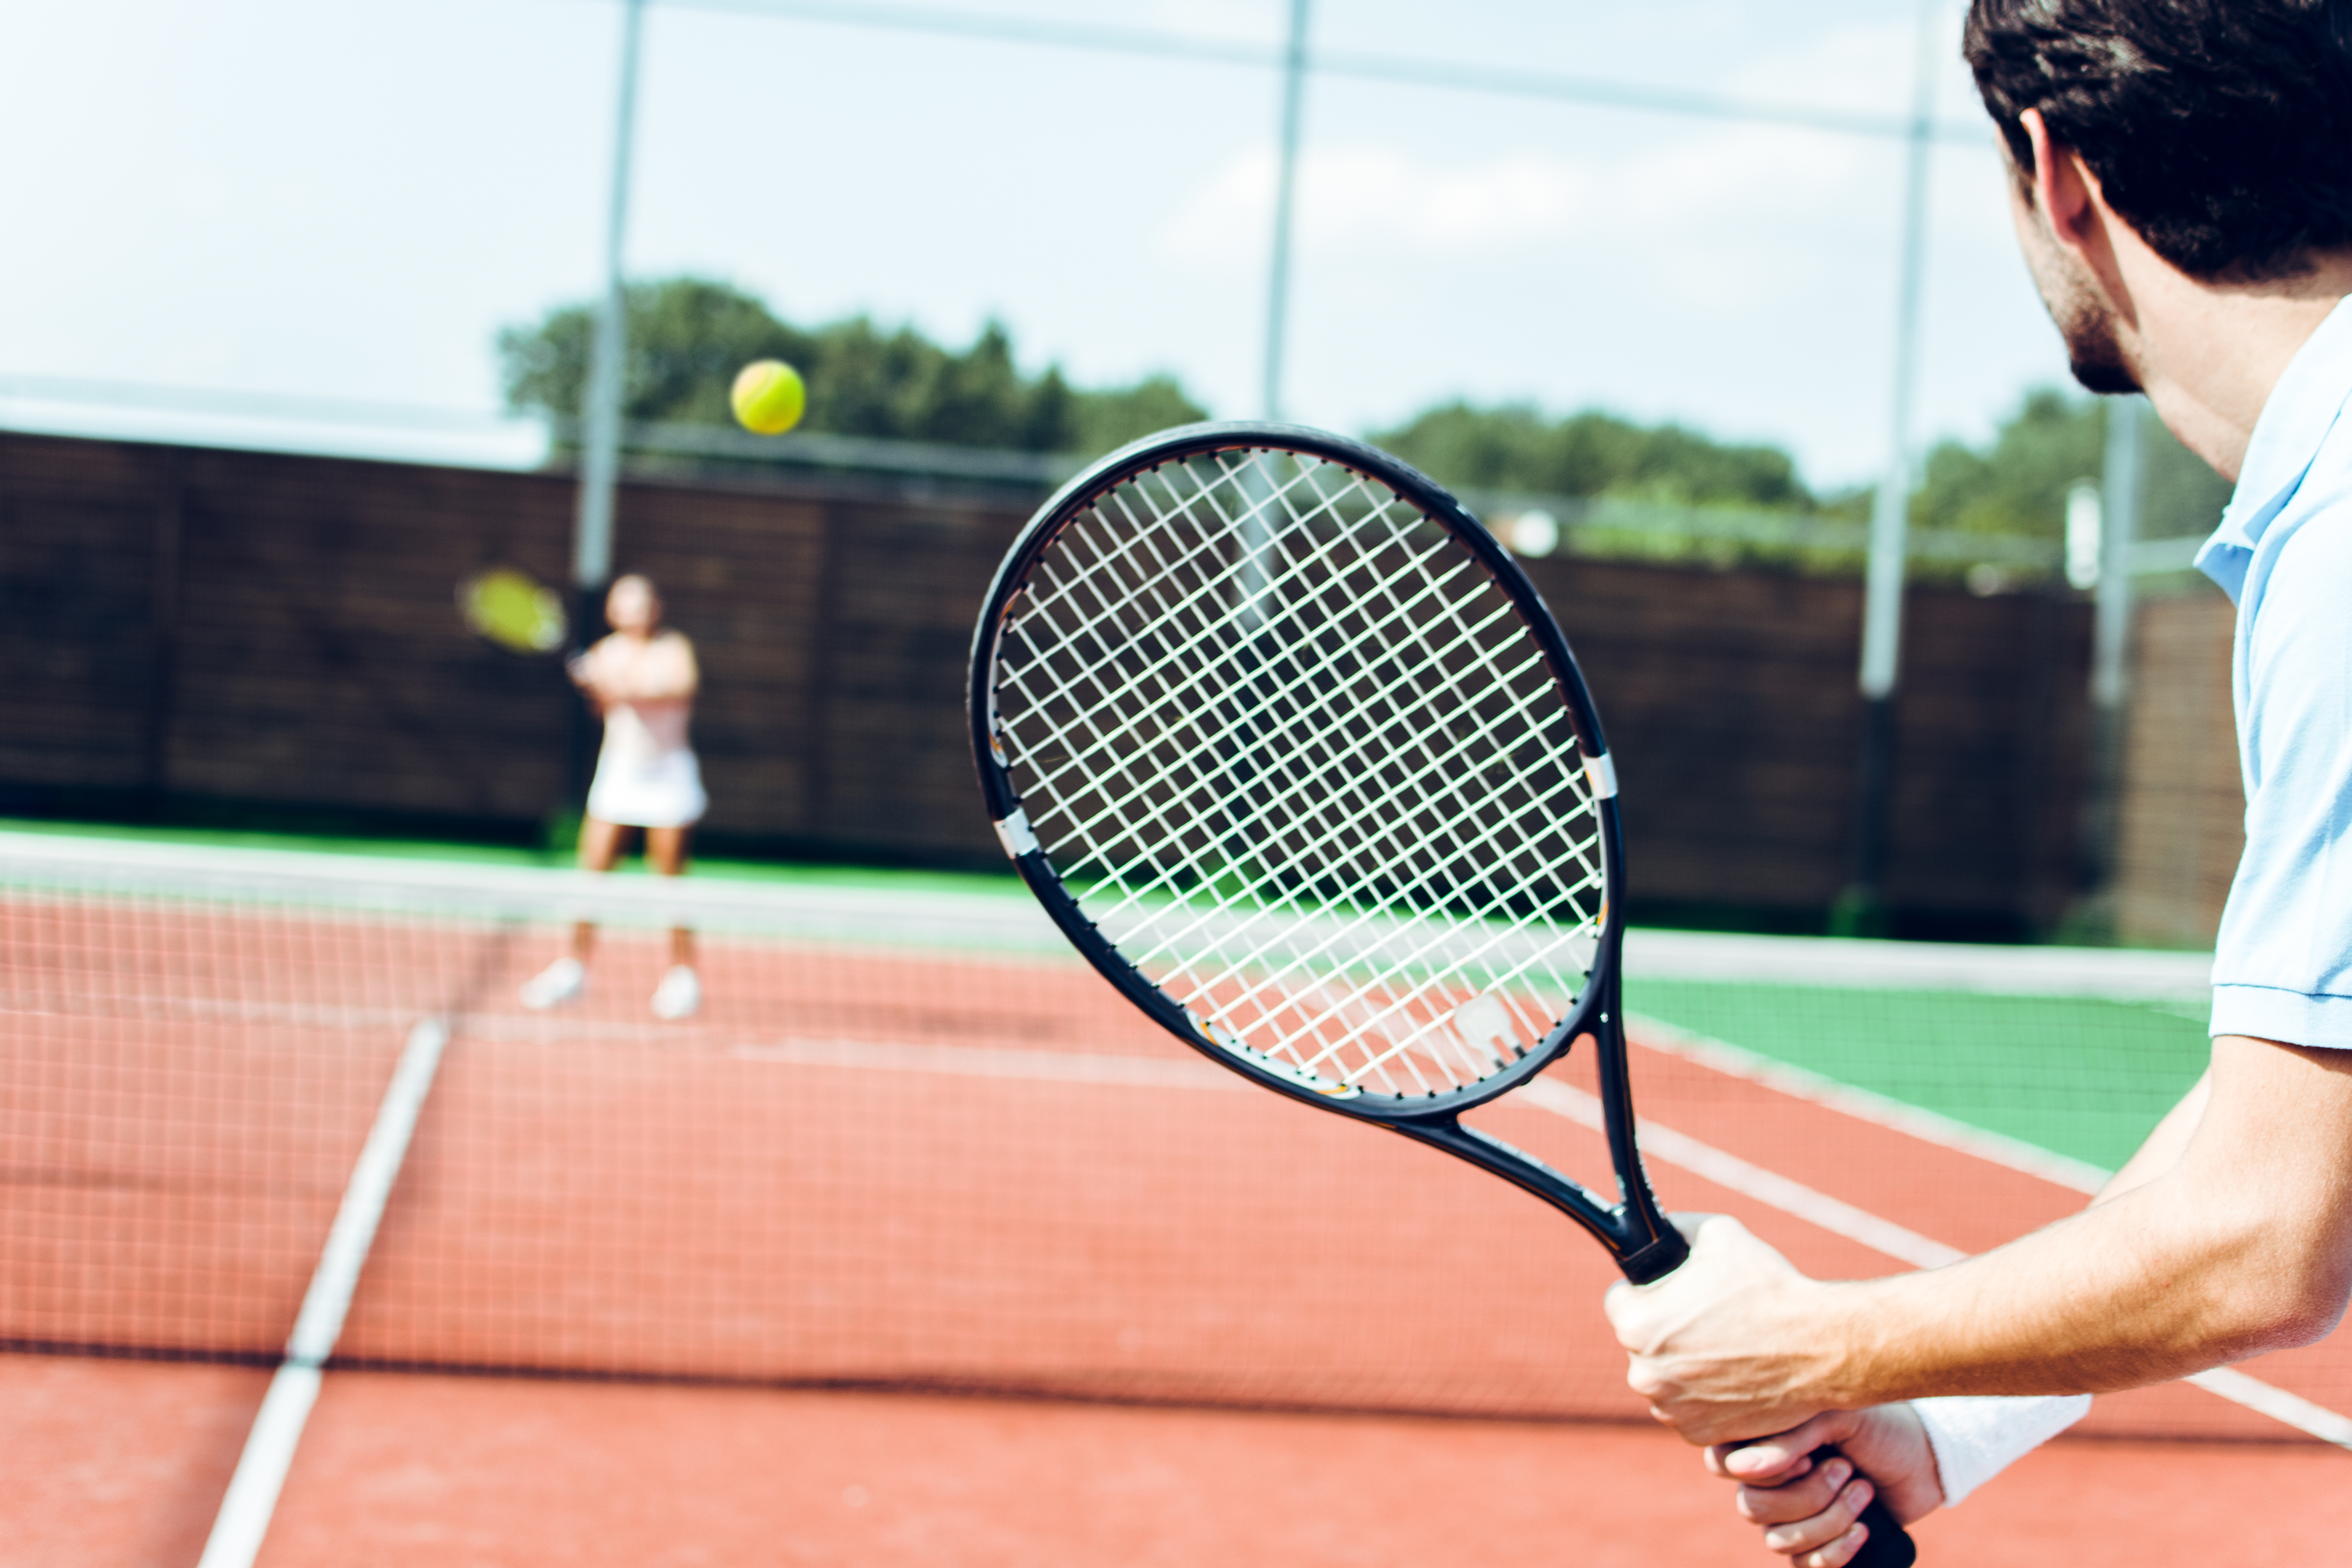 Couple playing on an outdoor tennis court